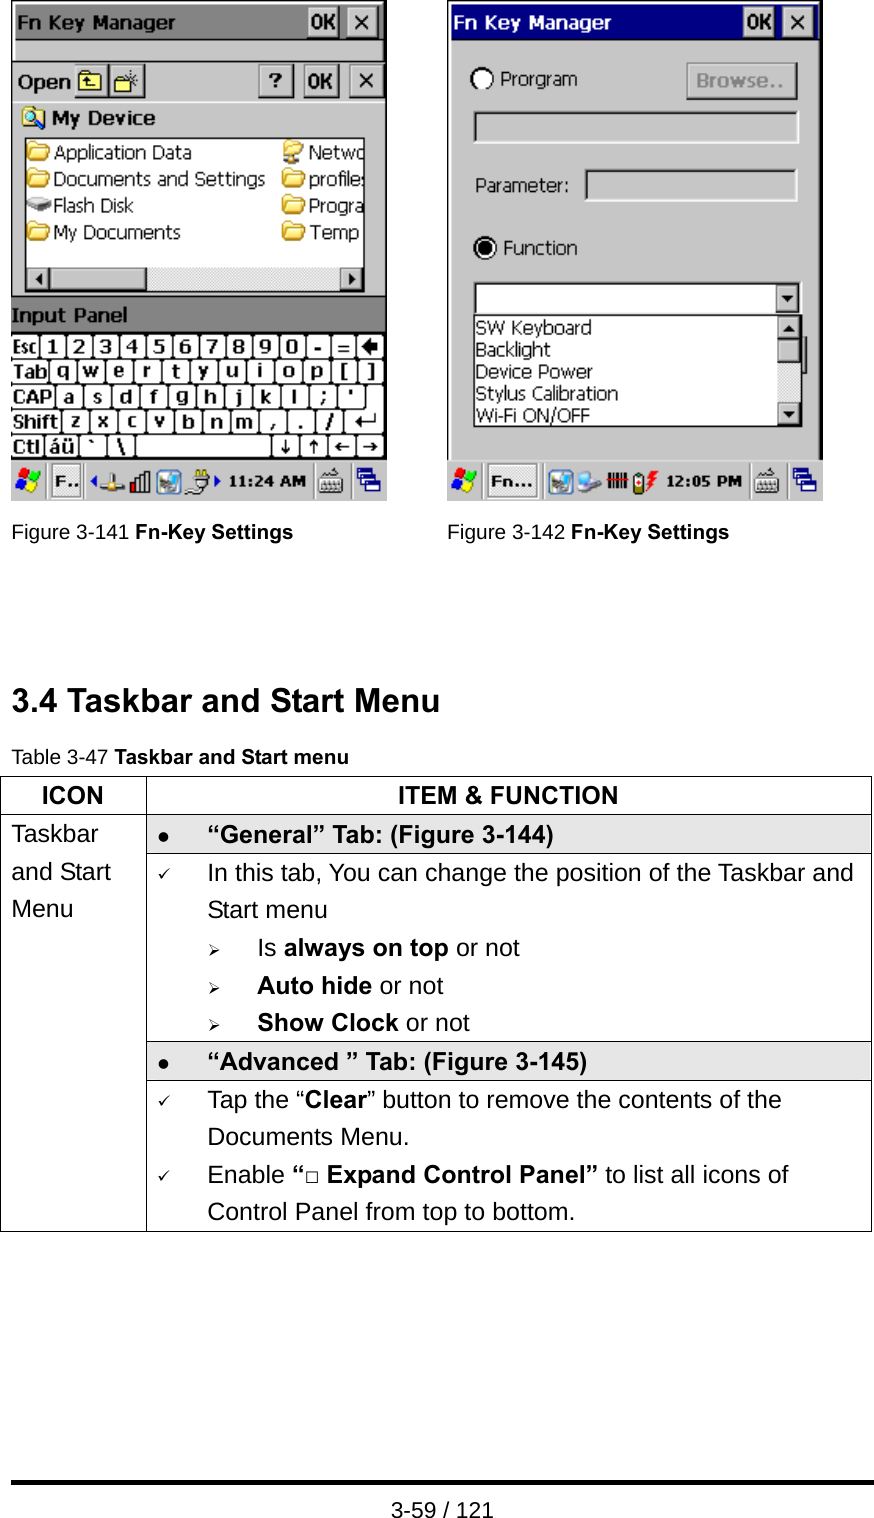  3-59 / 121    Figure 3-141 Fn-Key Settings Figure 3-142 Fn-Key Settings    3.4 Taskbar and Start Menu Table 3-47 Taskbar and Start menu ICON  ITEM &amp; FUNCTION z “General” Tab: (Figure 3-144) 9 In this tab, You can change the position of the Taskbar and Start menu   ¾ Is always on top or not ¾ Auto hide or not ¾ Show Clock or not z “Advanced ” Tab: (Figure 3-145) Taskbar and Start Menu 9 Tap the “Clear” button to remove the contents of the Documents Menu. 9 Enable “□ Expand Control Panel” to list all icons of Control Panel from top to bottom.  